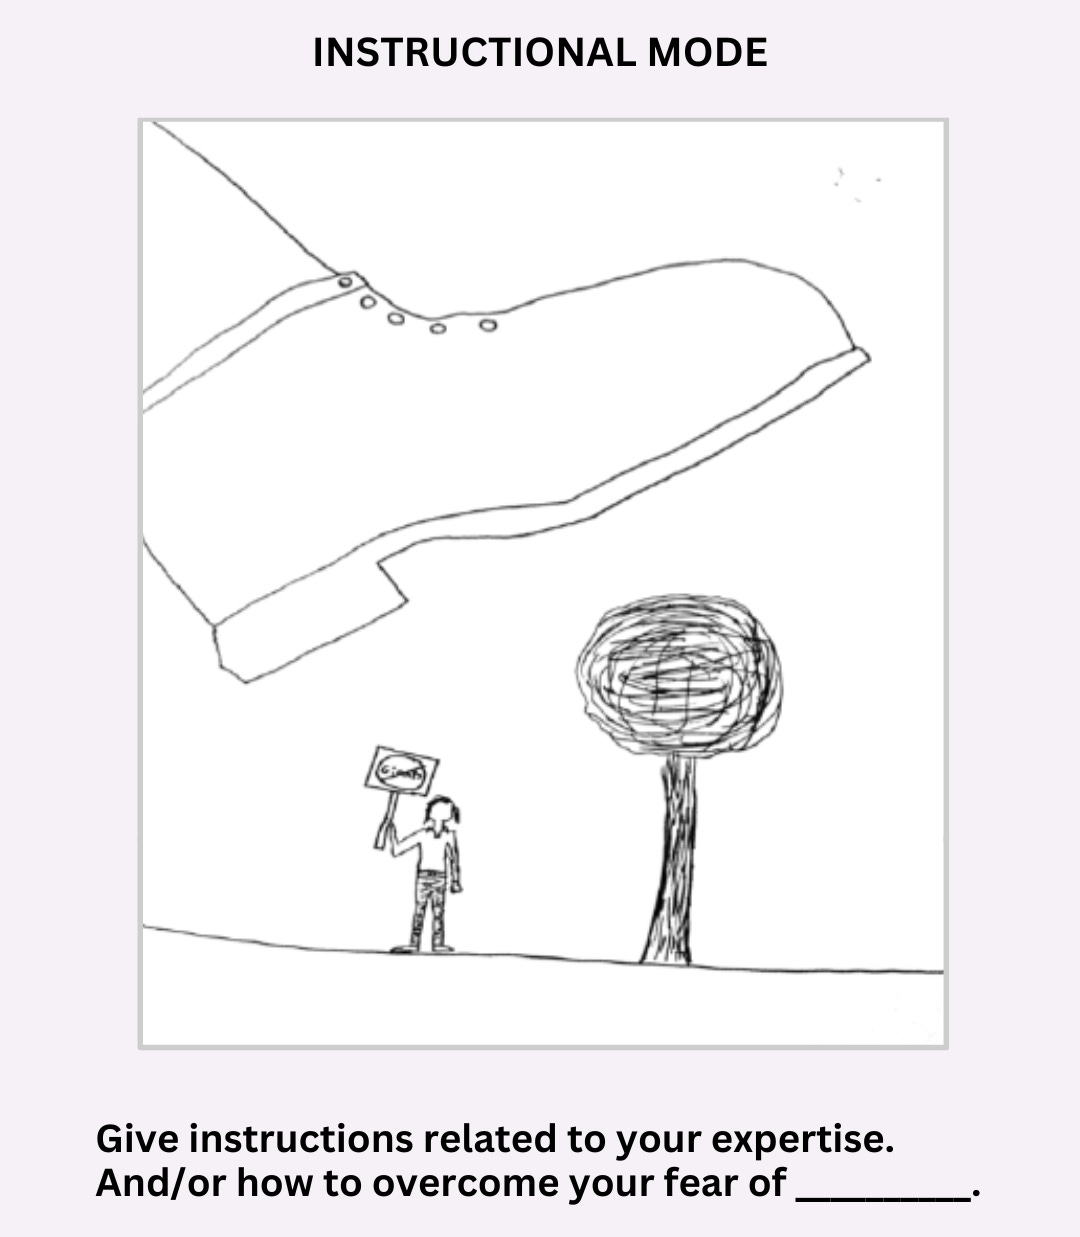 Text reads: "Instructional mode. Give instructions related to your expertise. And/or how to overcome your fear of [blank]." The image is a simple drawing of a person standing beside a tree holding a sign protesting something. A huge boot is hovering above the person, as if about to squash them.